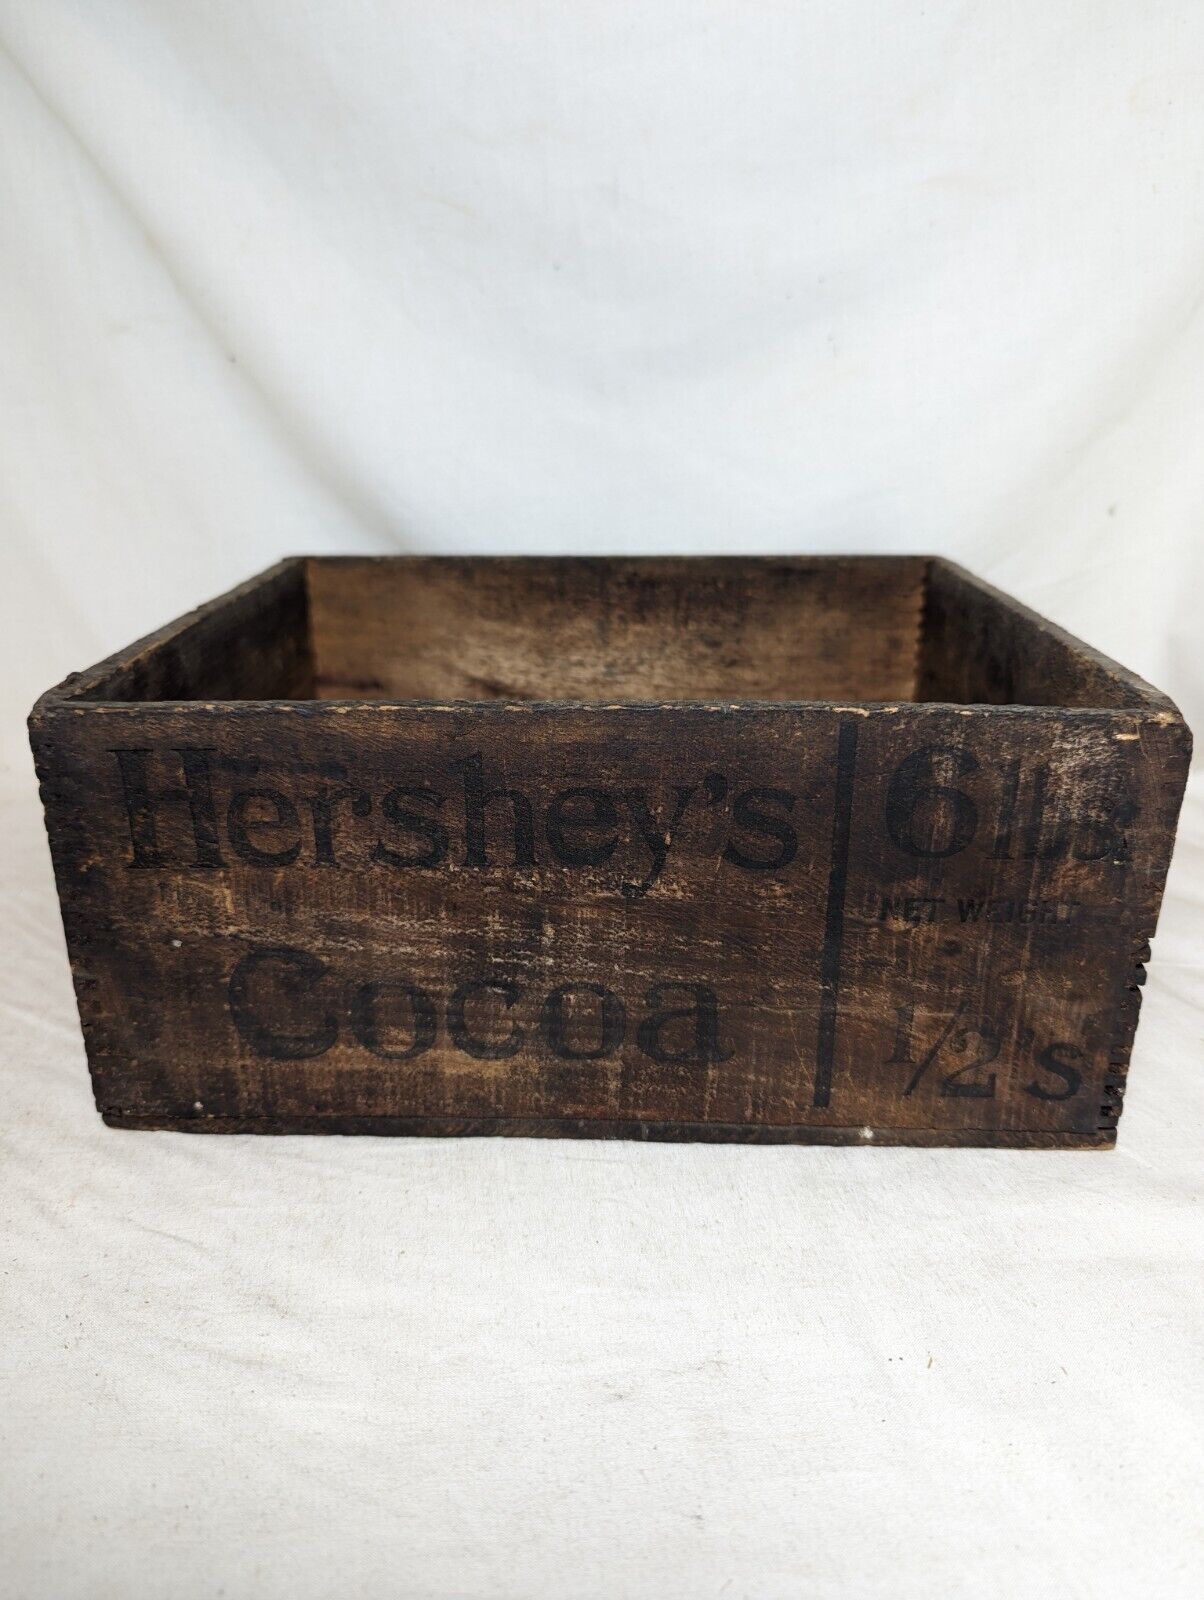 Antique Hershey's Cocoa shipping crate Wood box Americana Advertising Rare